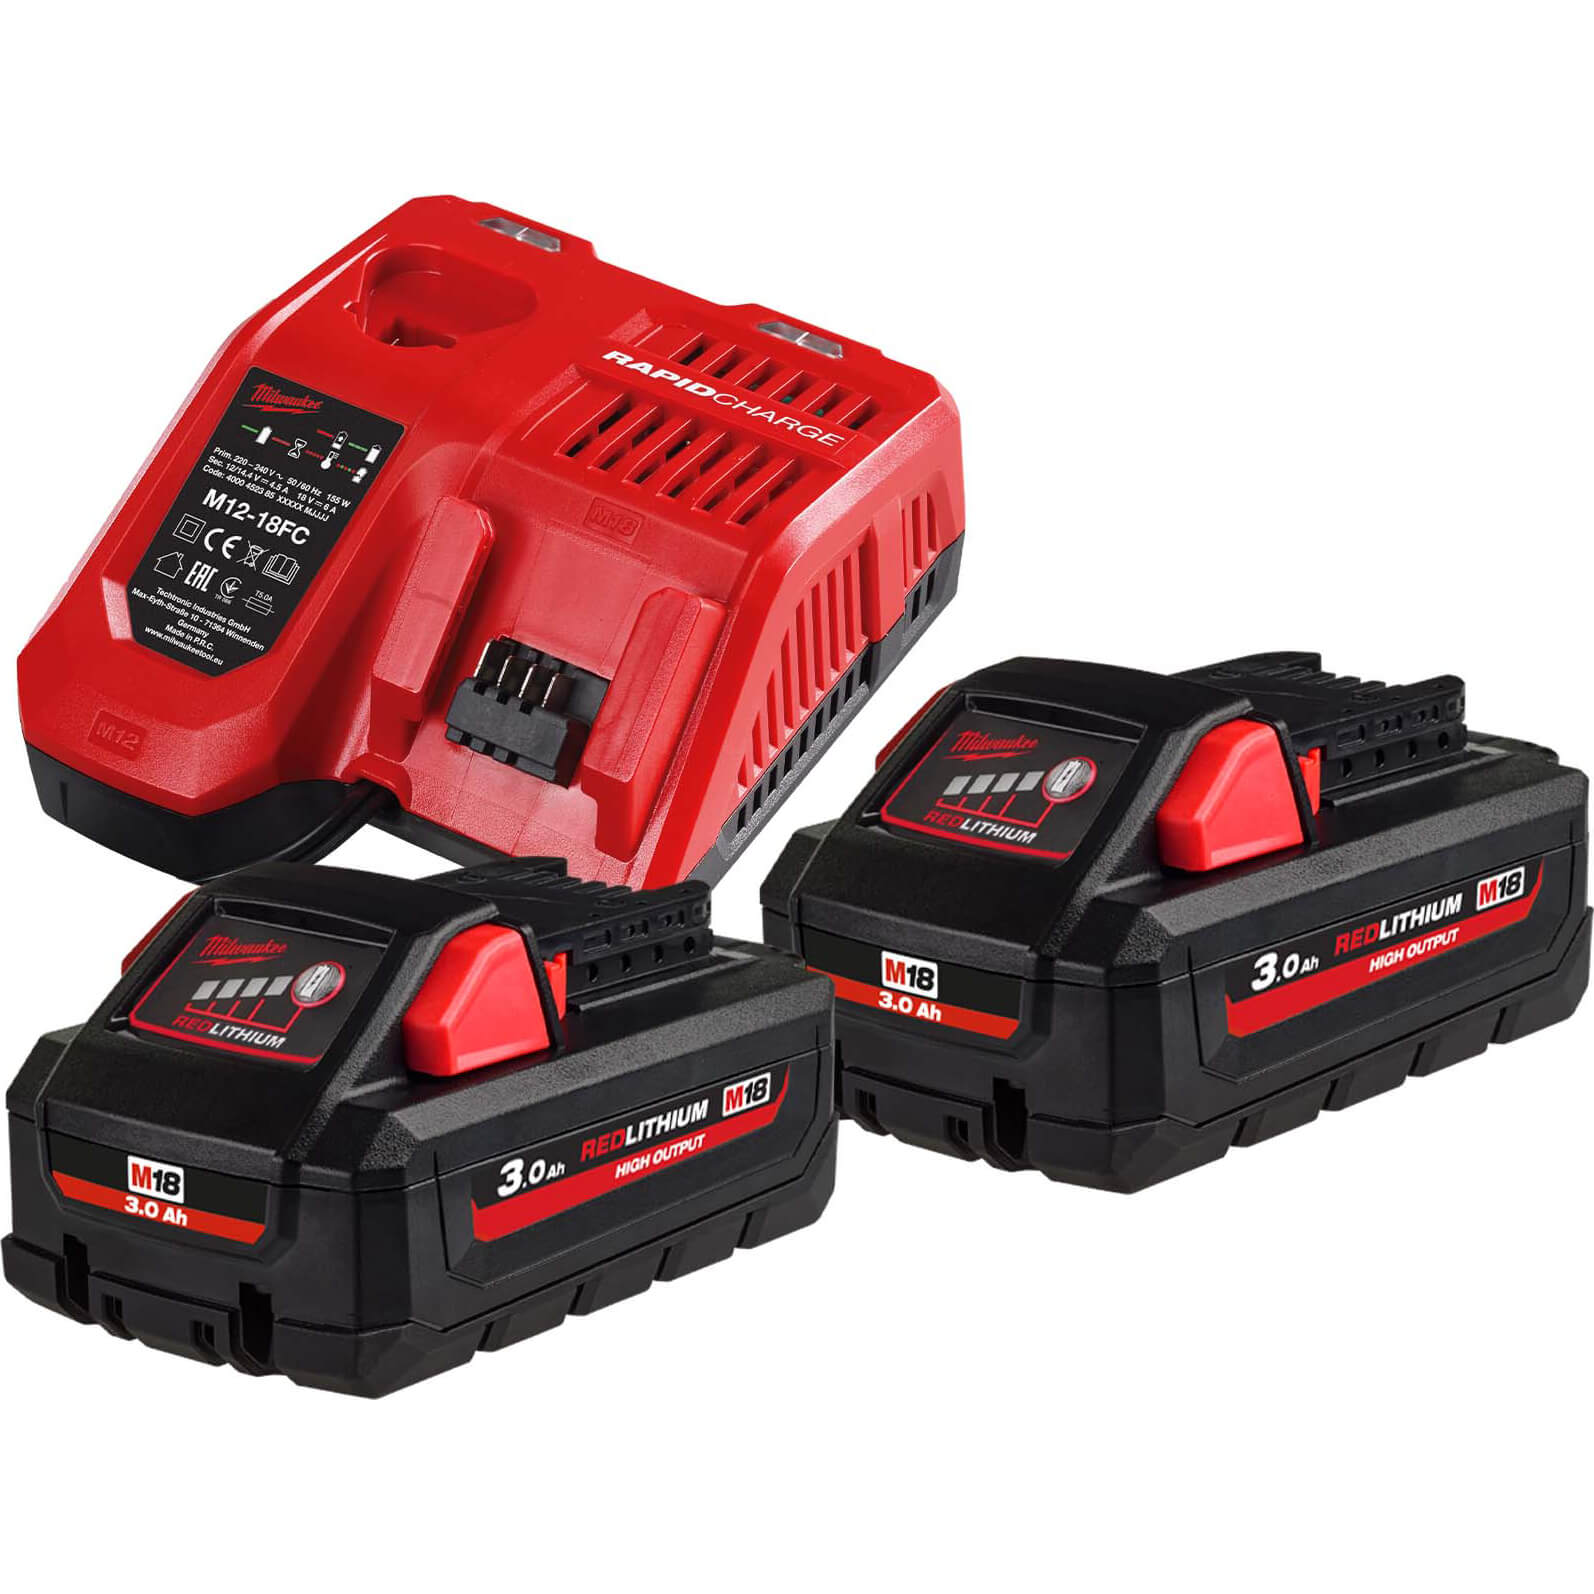 Image of Milwaukee M18 HNRG 18v Cordless Battery Charger and Twin 3ah Batteries 3ah